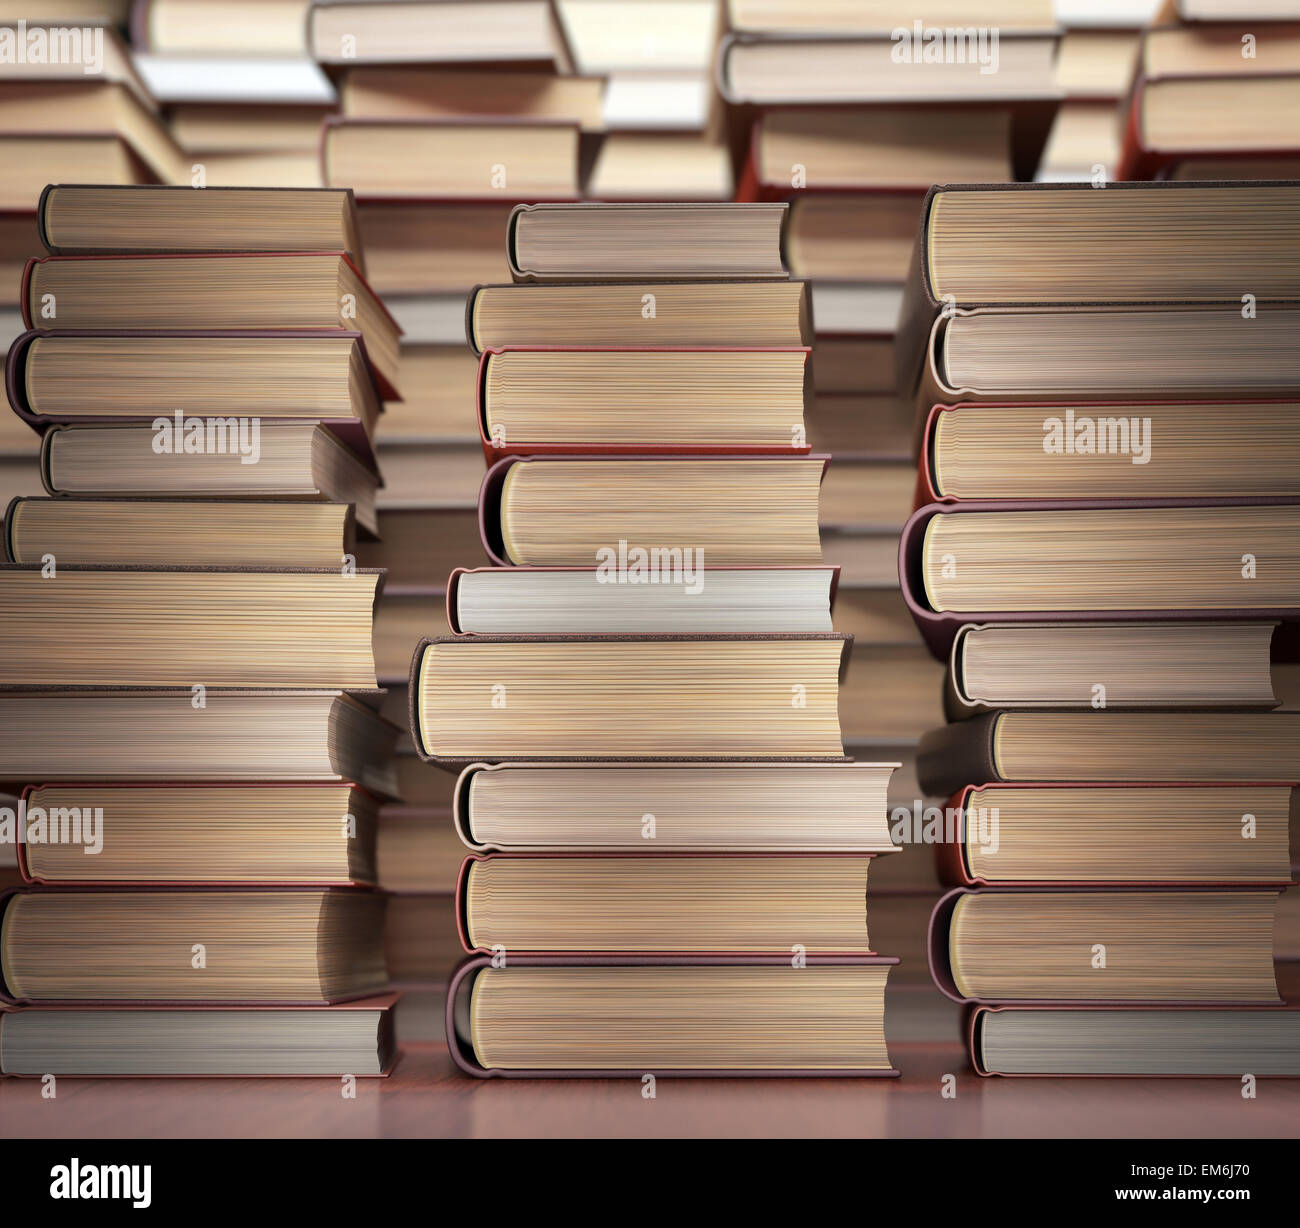 Several books stacked on the table. Stock Photo